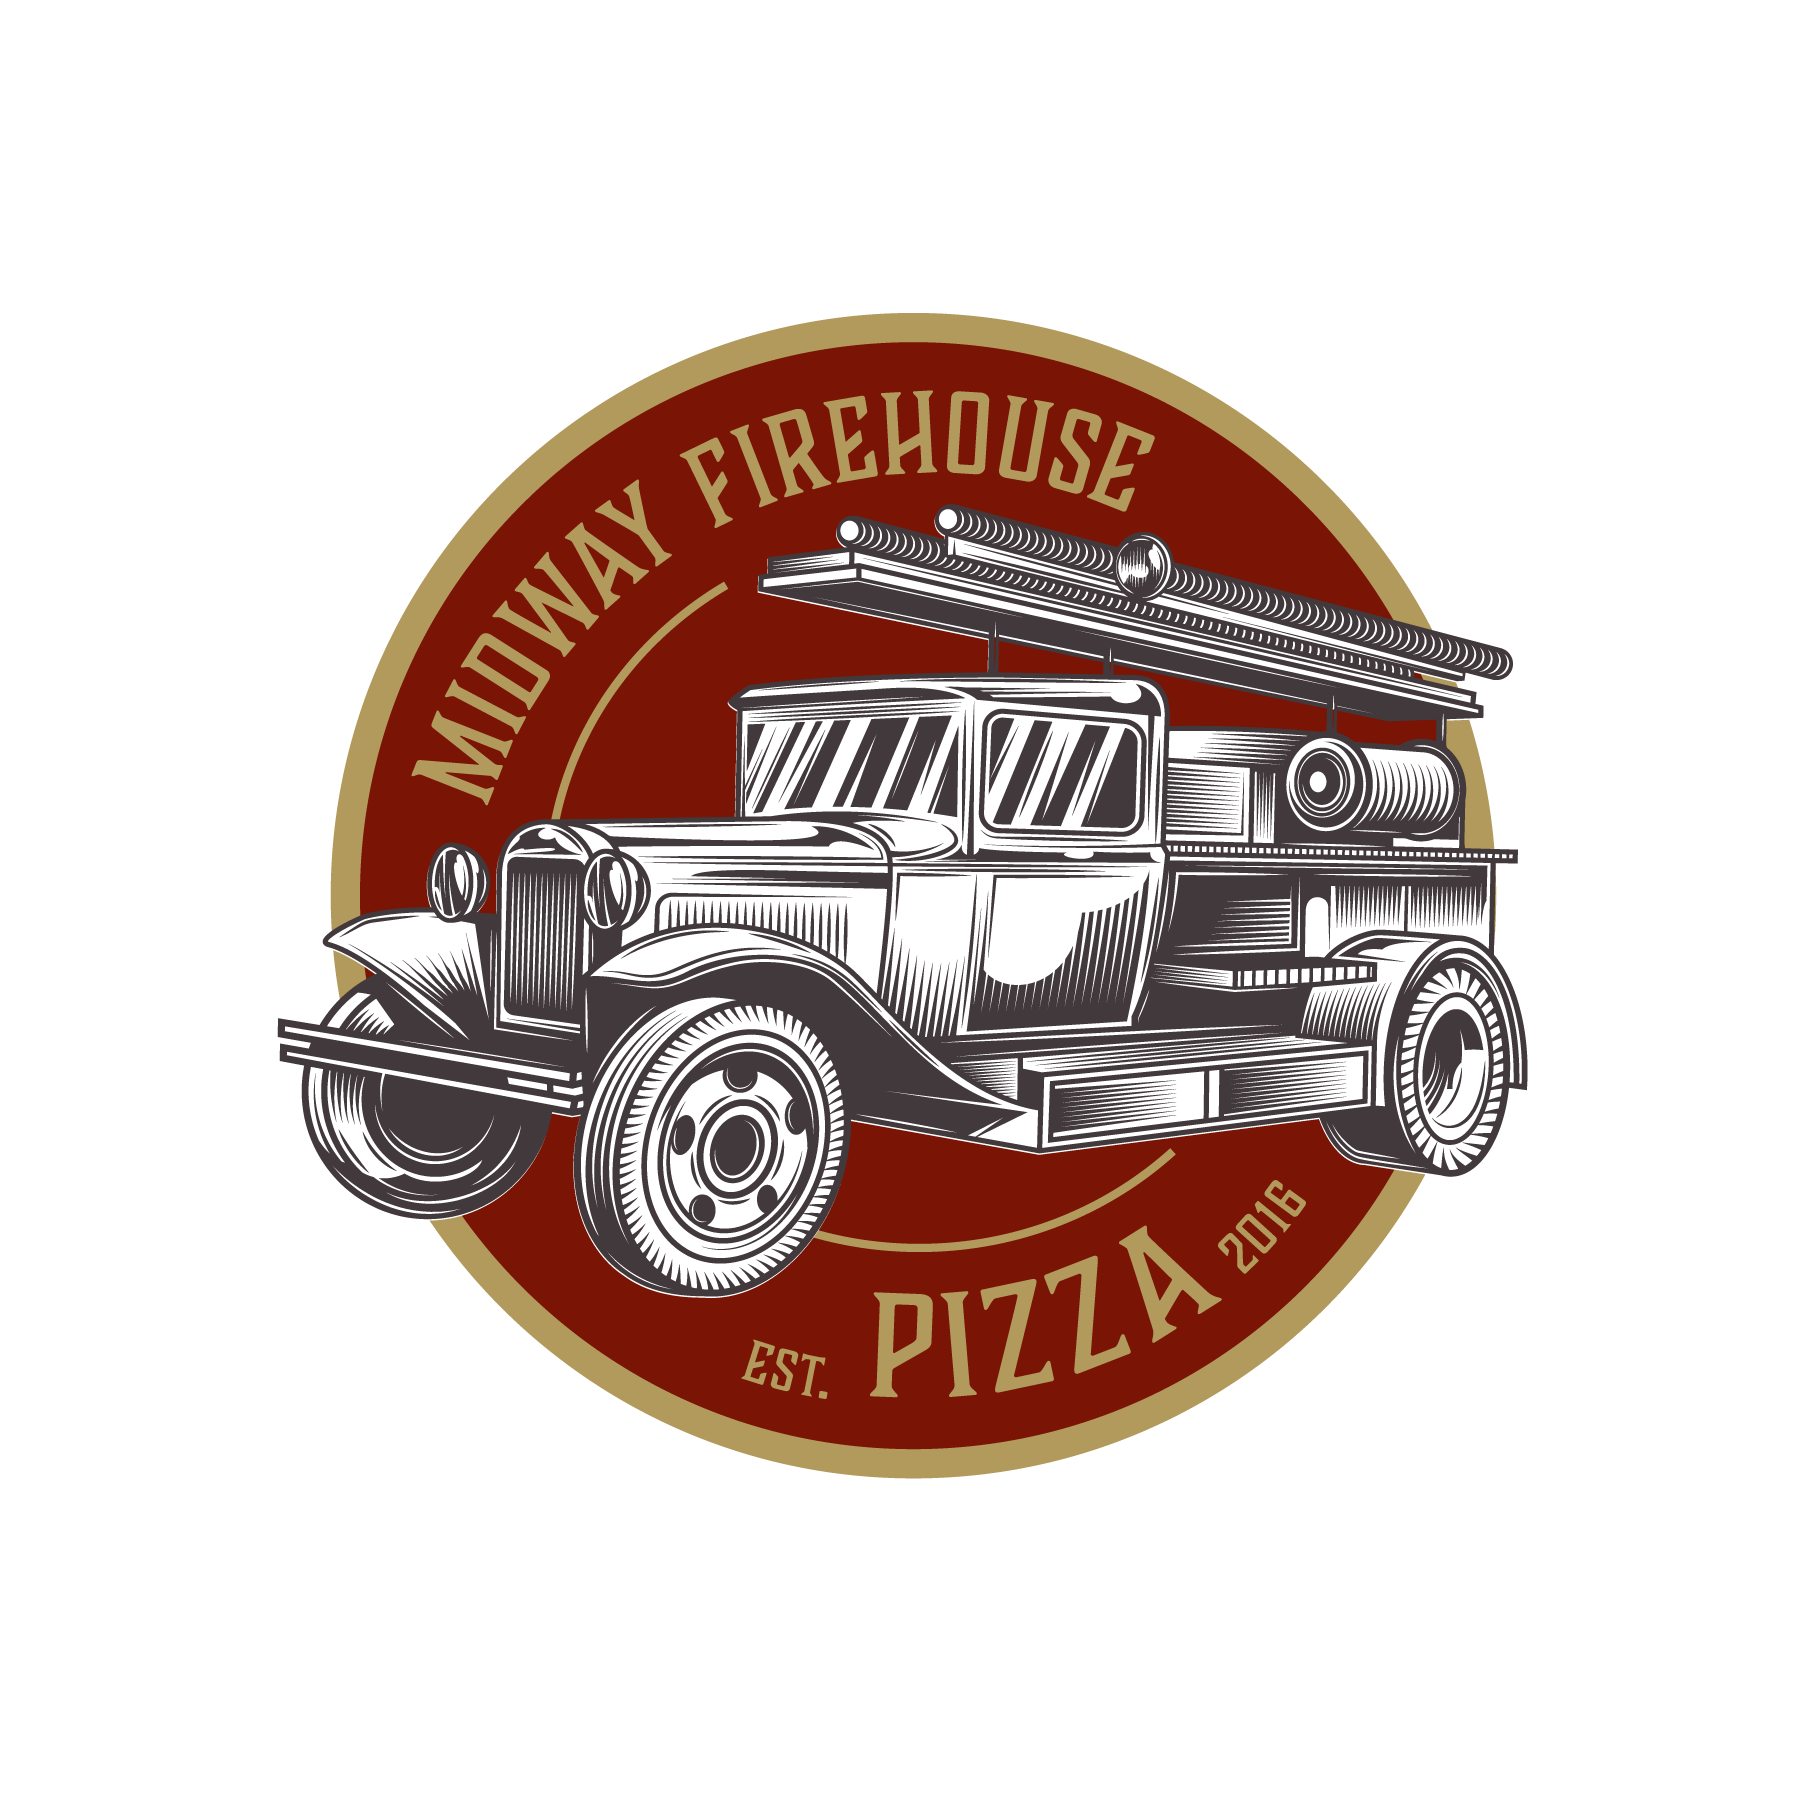 Midway Firehouse Pizza2 Homepage